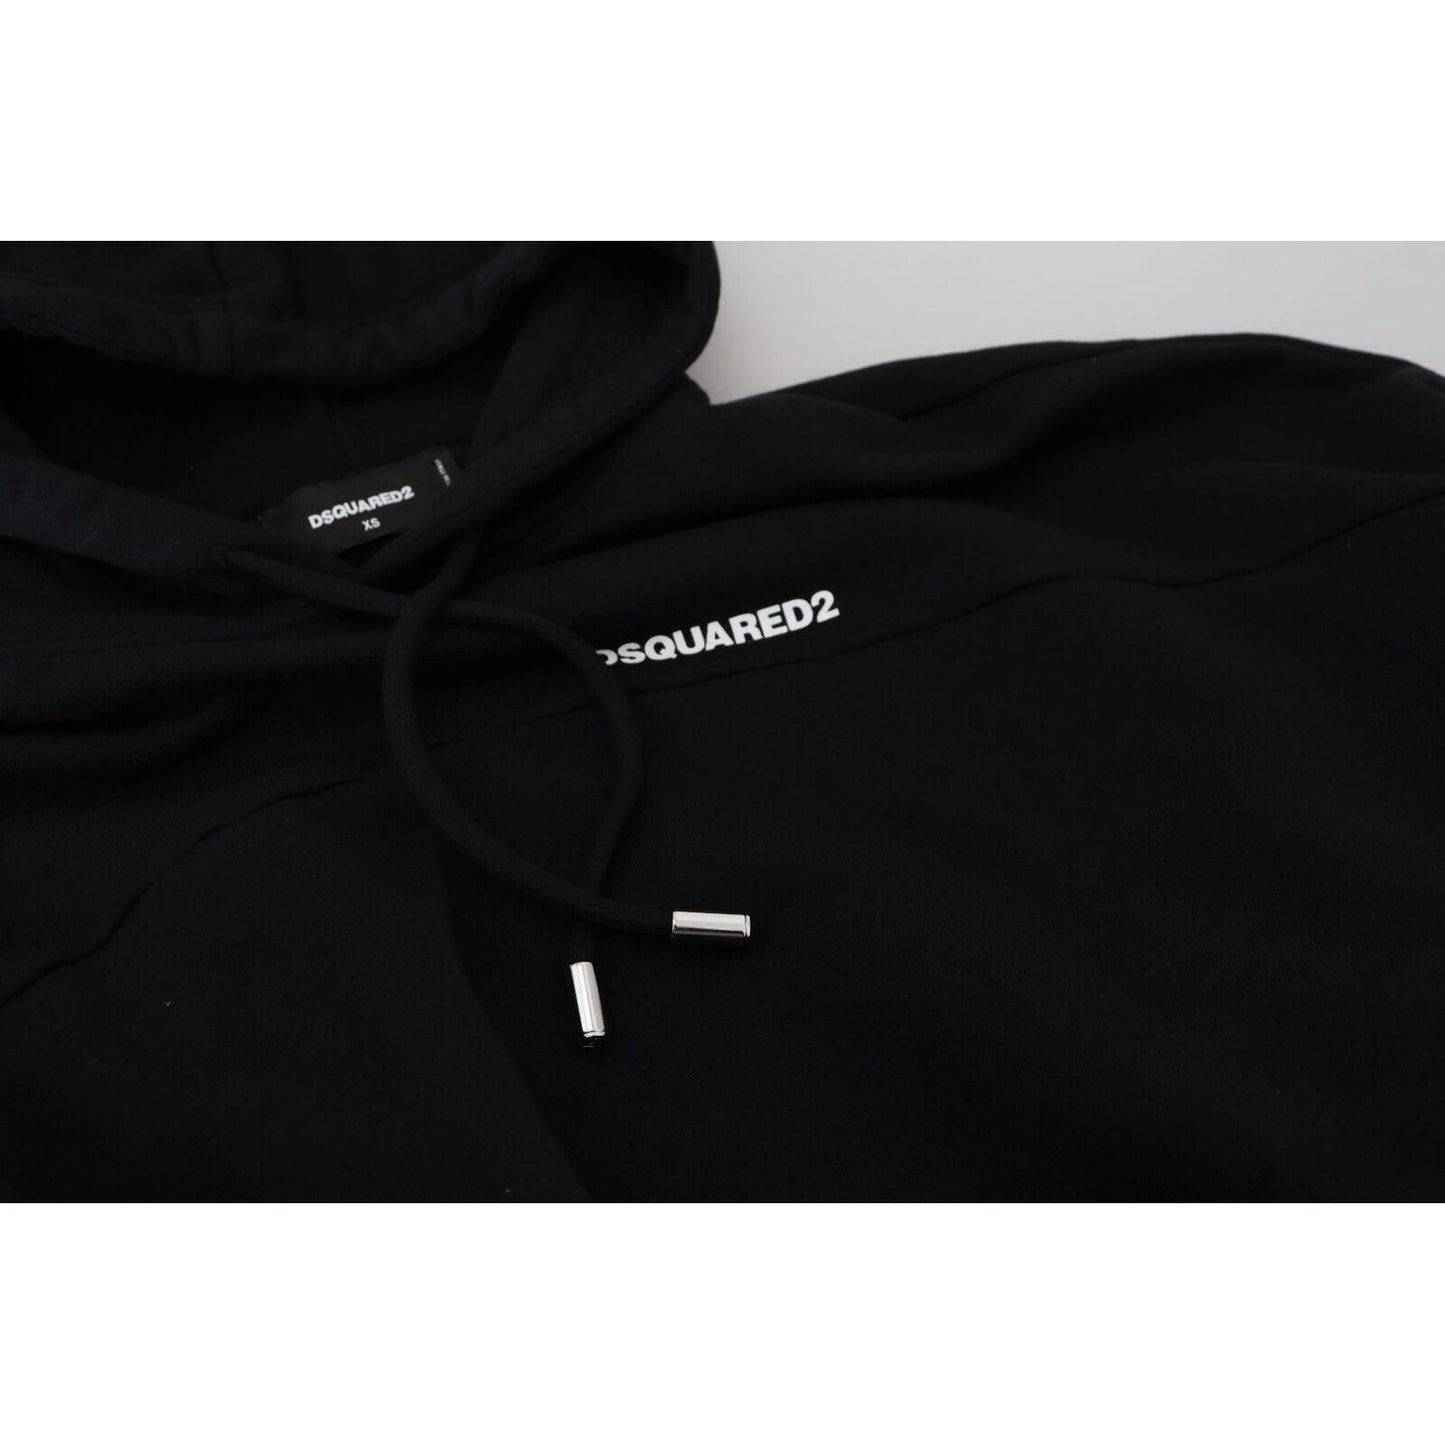 Dsquared² Black Logo Patch Cotton Hoodie Sweatshirt Sweater black-logo-patch-cotton-hoodie-sweatshirt-sweater